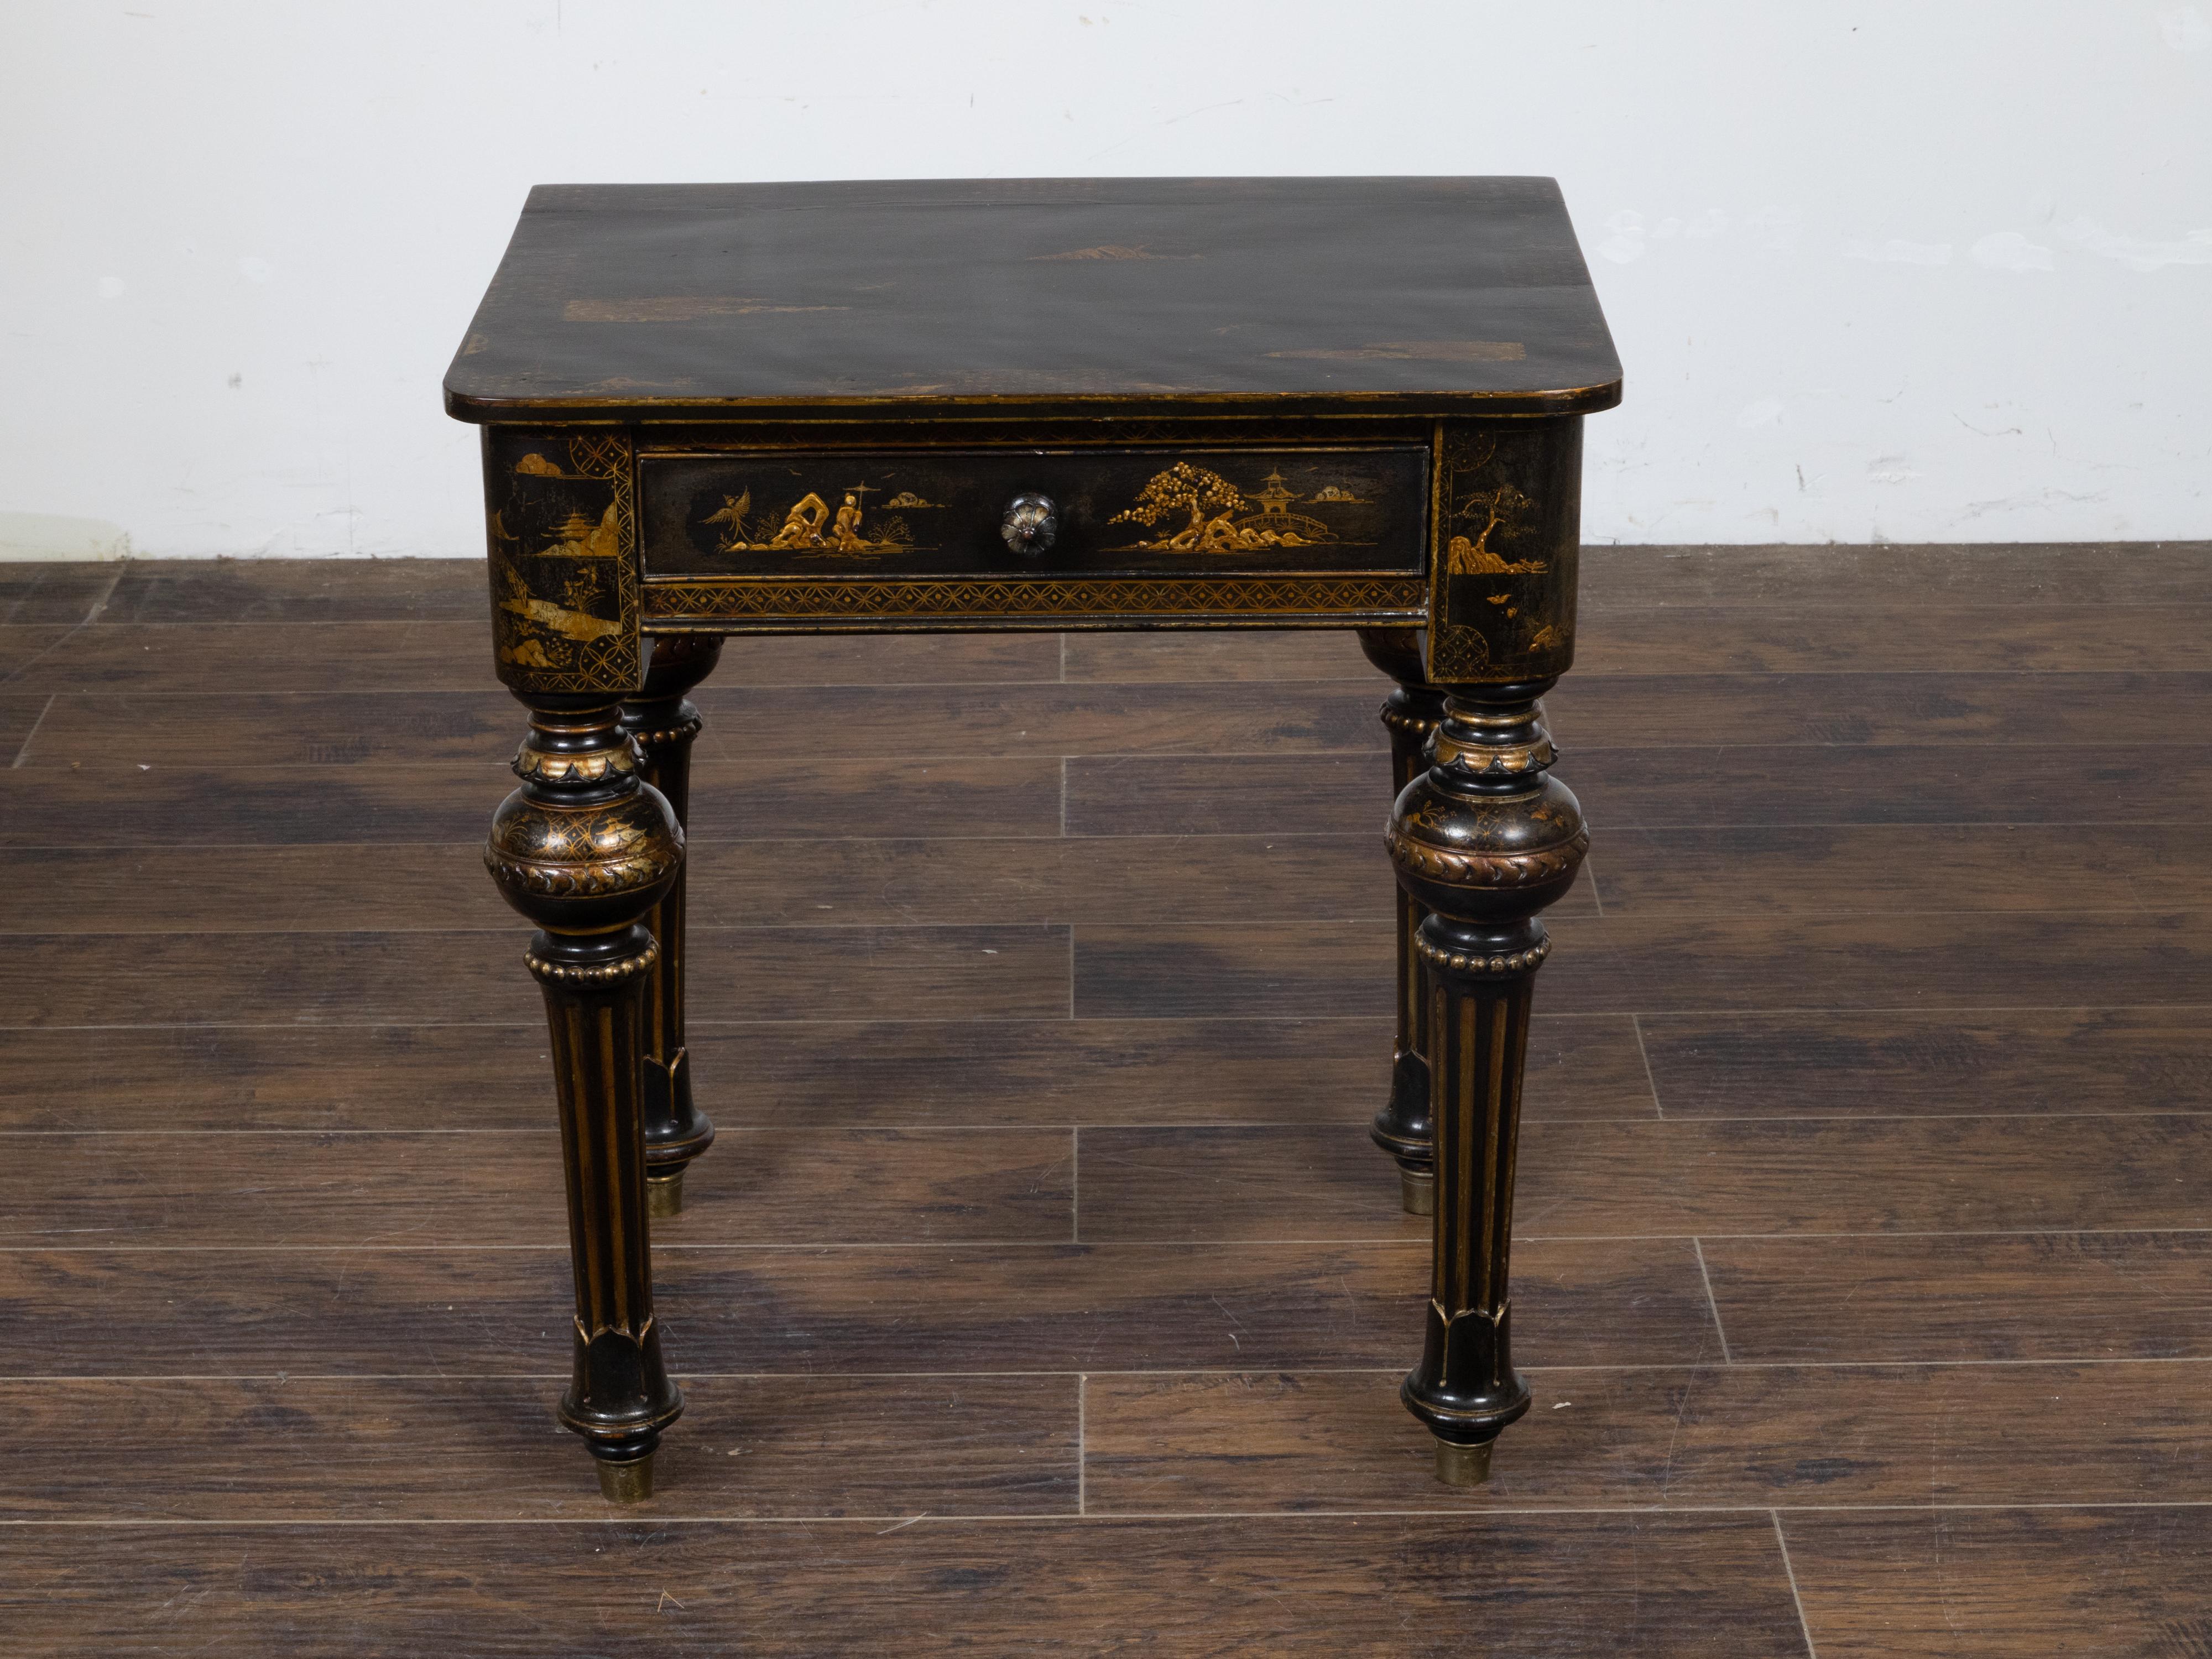 An English black and gold japanned side table circa 1880 with Chinoiserie décor depicting architectures in landscapes, birds, trees and flowers, with single drawer and turned fluted legs. This English black and gold japanned side table, dating back